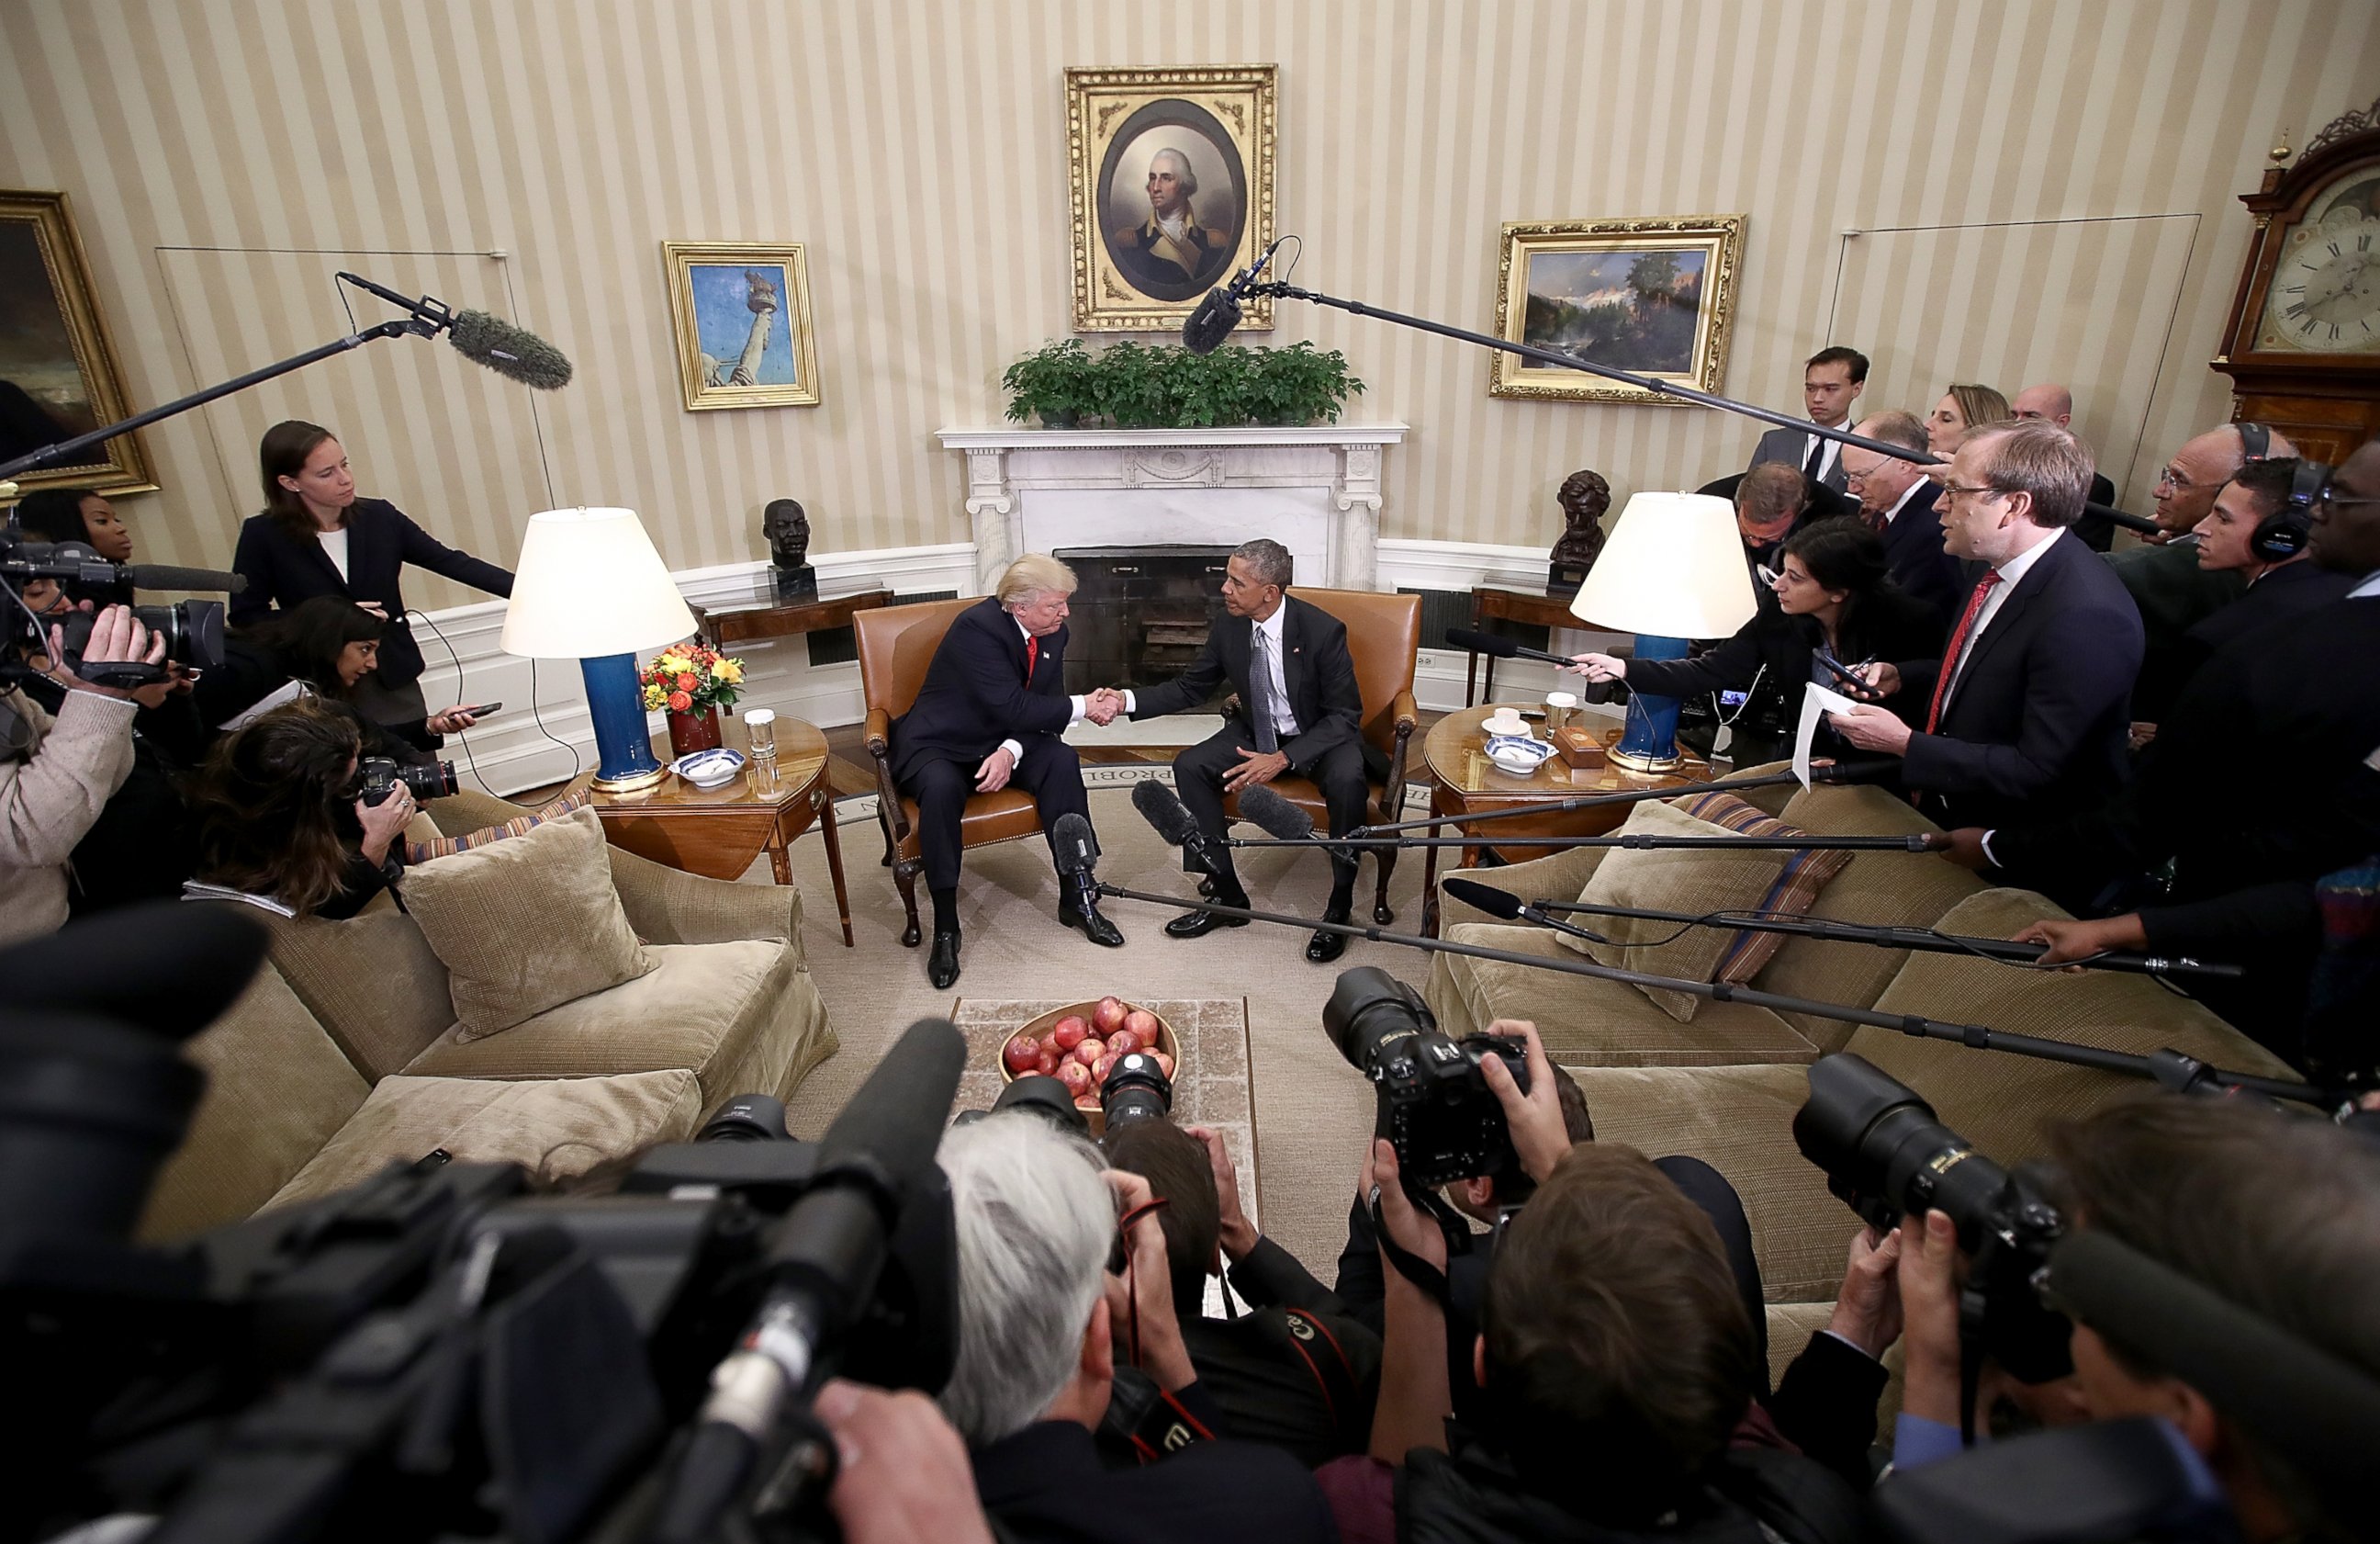 PHOTO: Members of the White House Press Corps record the moments of the first meeting between President Barack Obama and President-elect Donald Trump in a meeting in the Oval Office Nov. 10, 2016.